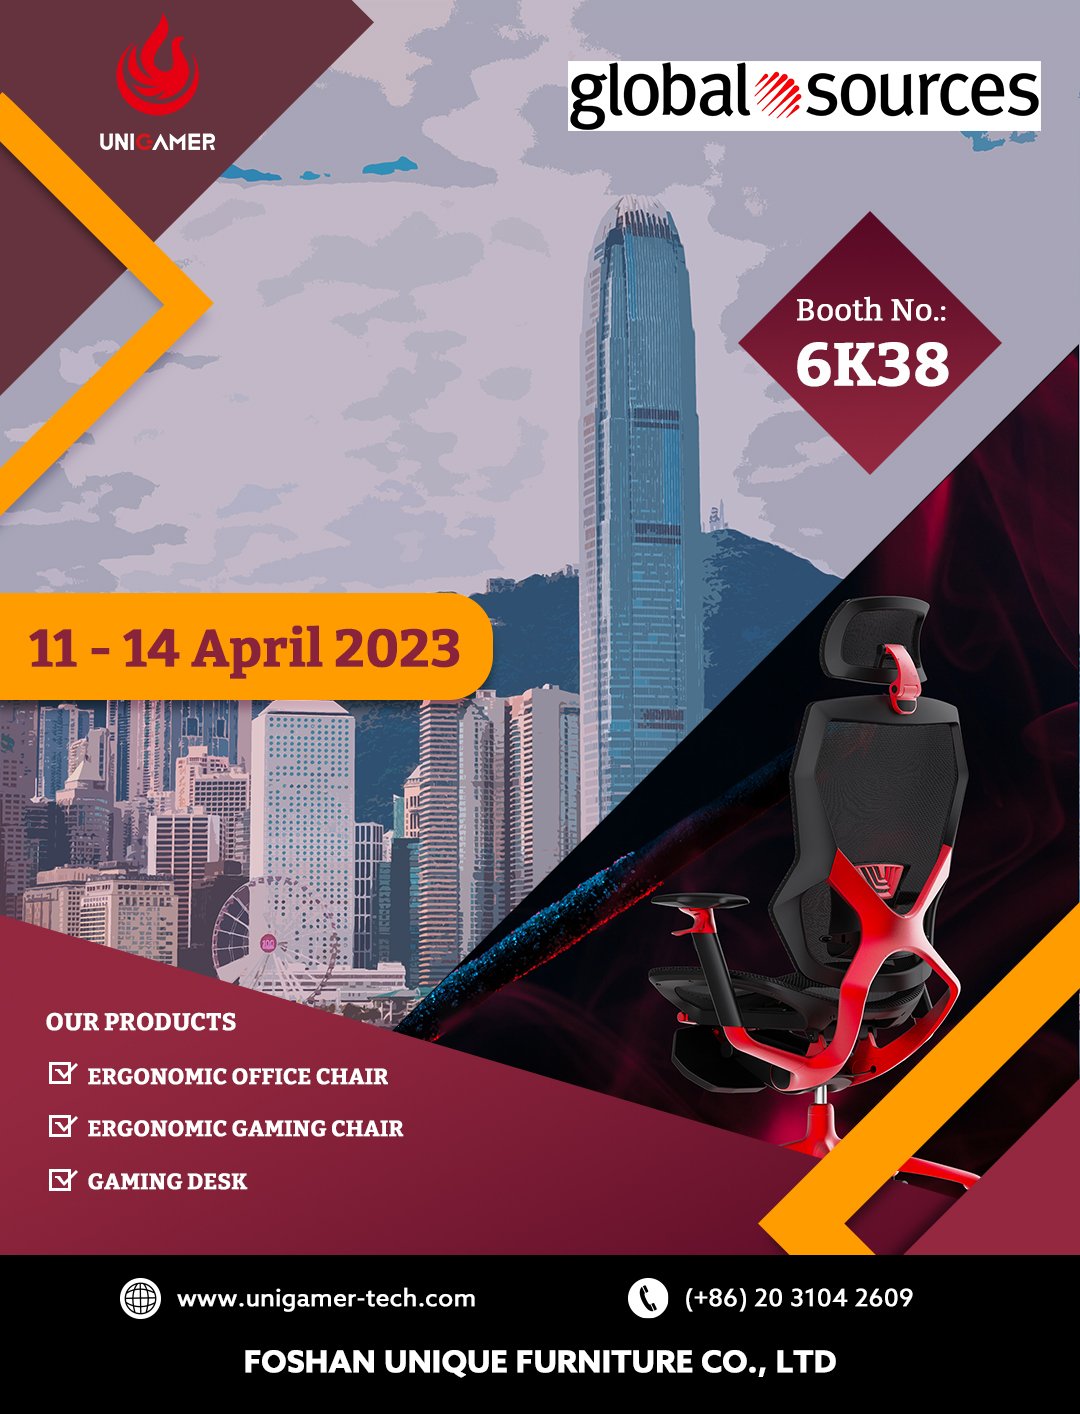 HK Global Sources fair is coming up Unigamer Furniture, Gears, Chairs